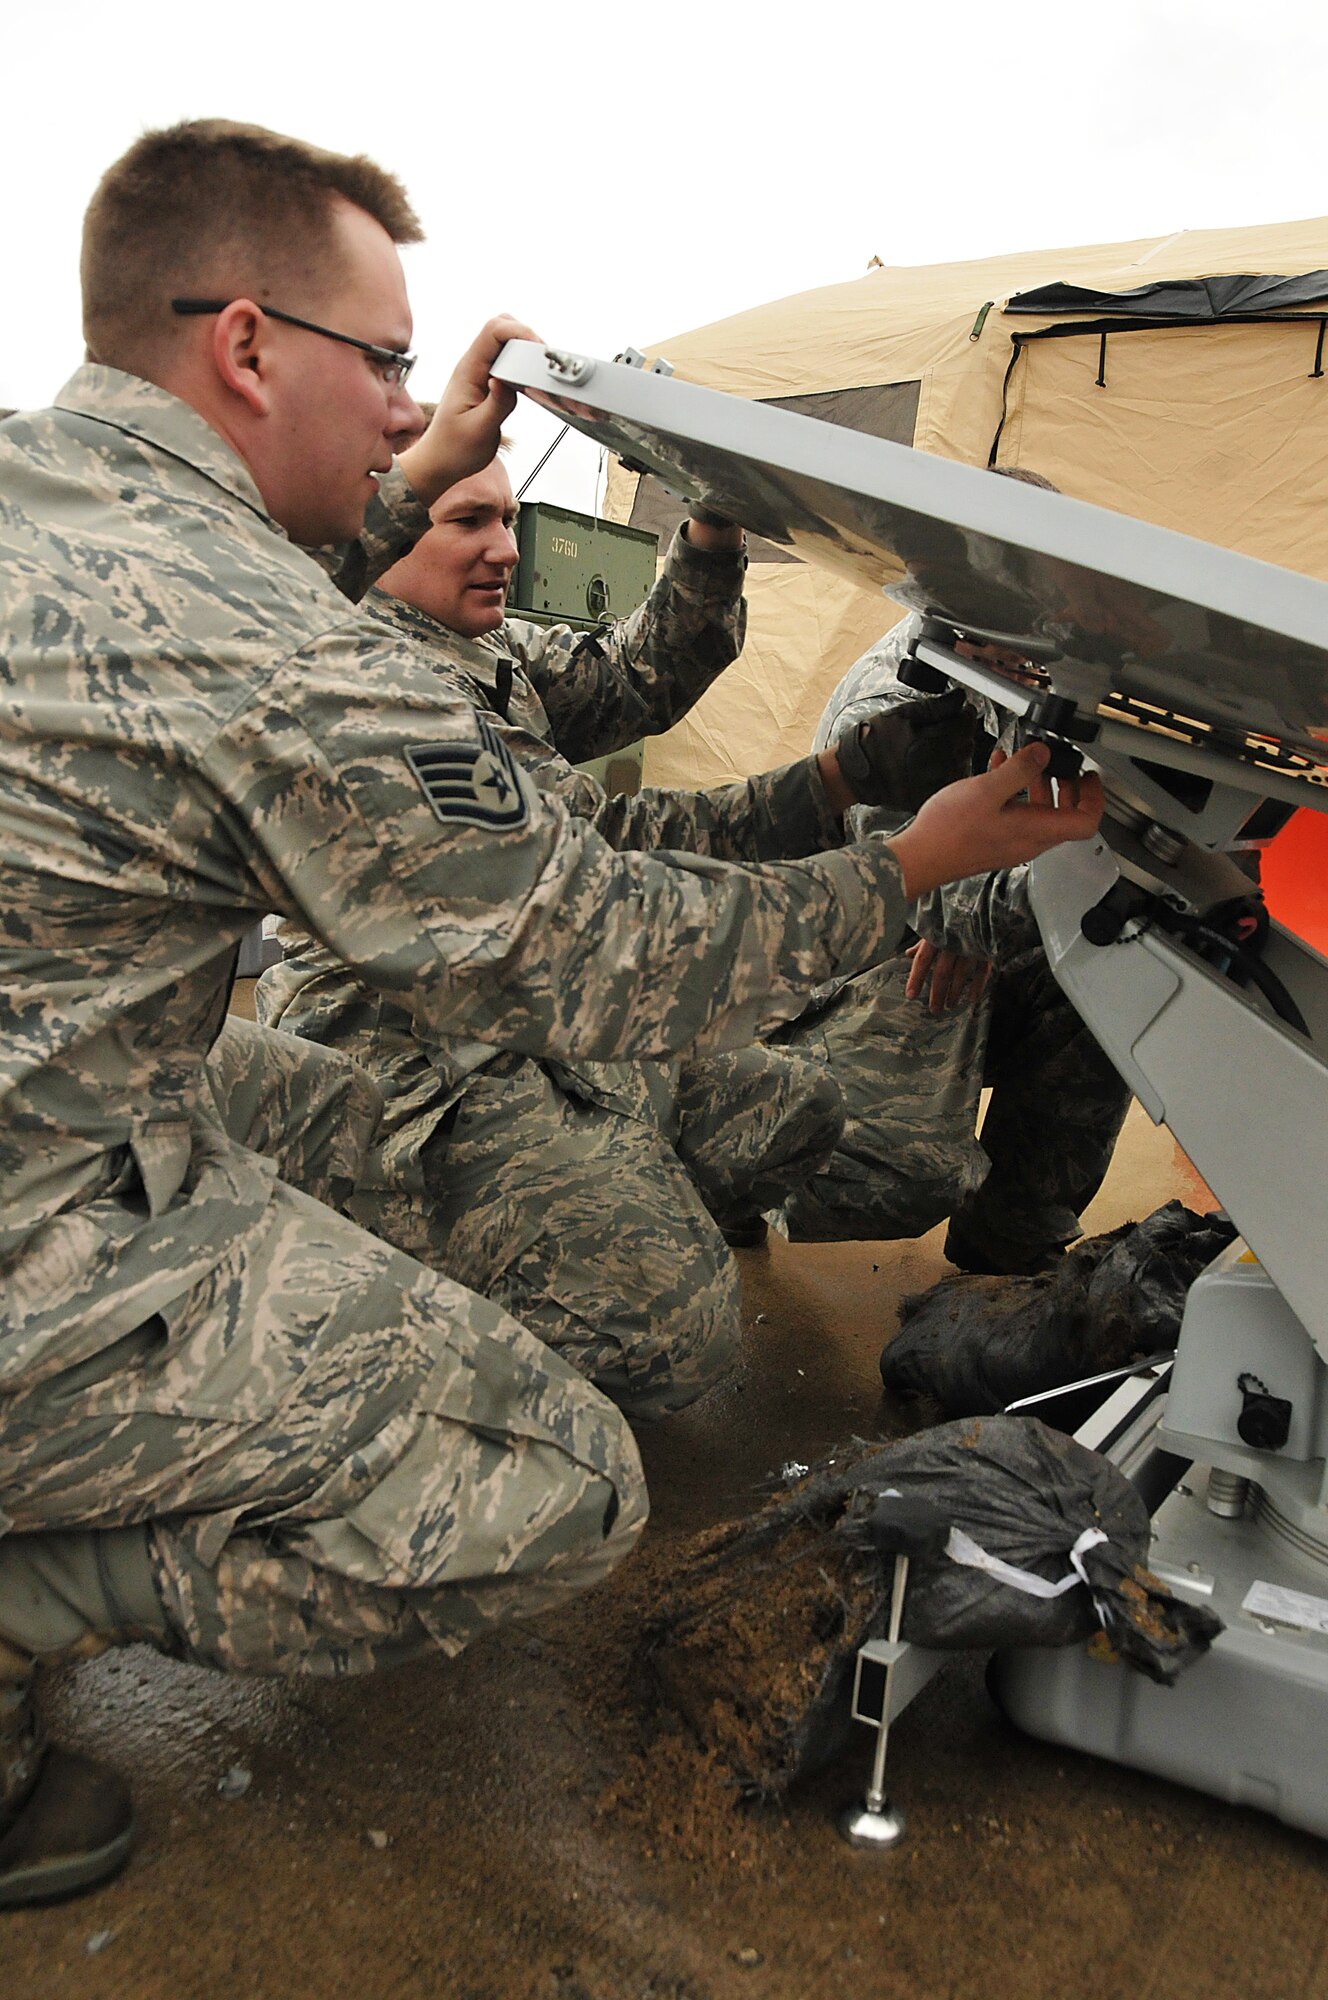 Staff Sgt. Joseph Davis (left) and Master Sgt. Nathan Lukey, members of the Joint Incident Sight Communications Capability Team, assemble a mobile satellite to ensure communications during a 50-hour exercise at Springfield Air National Guard Base that showcased the base’s unique capabilities for incident awareness and assessment during domestic disasters, April 4-5. (U.S. Air National Guard Photo by Tech. Sgt. Lou Burton)